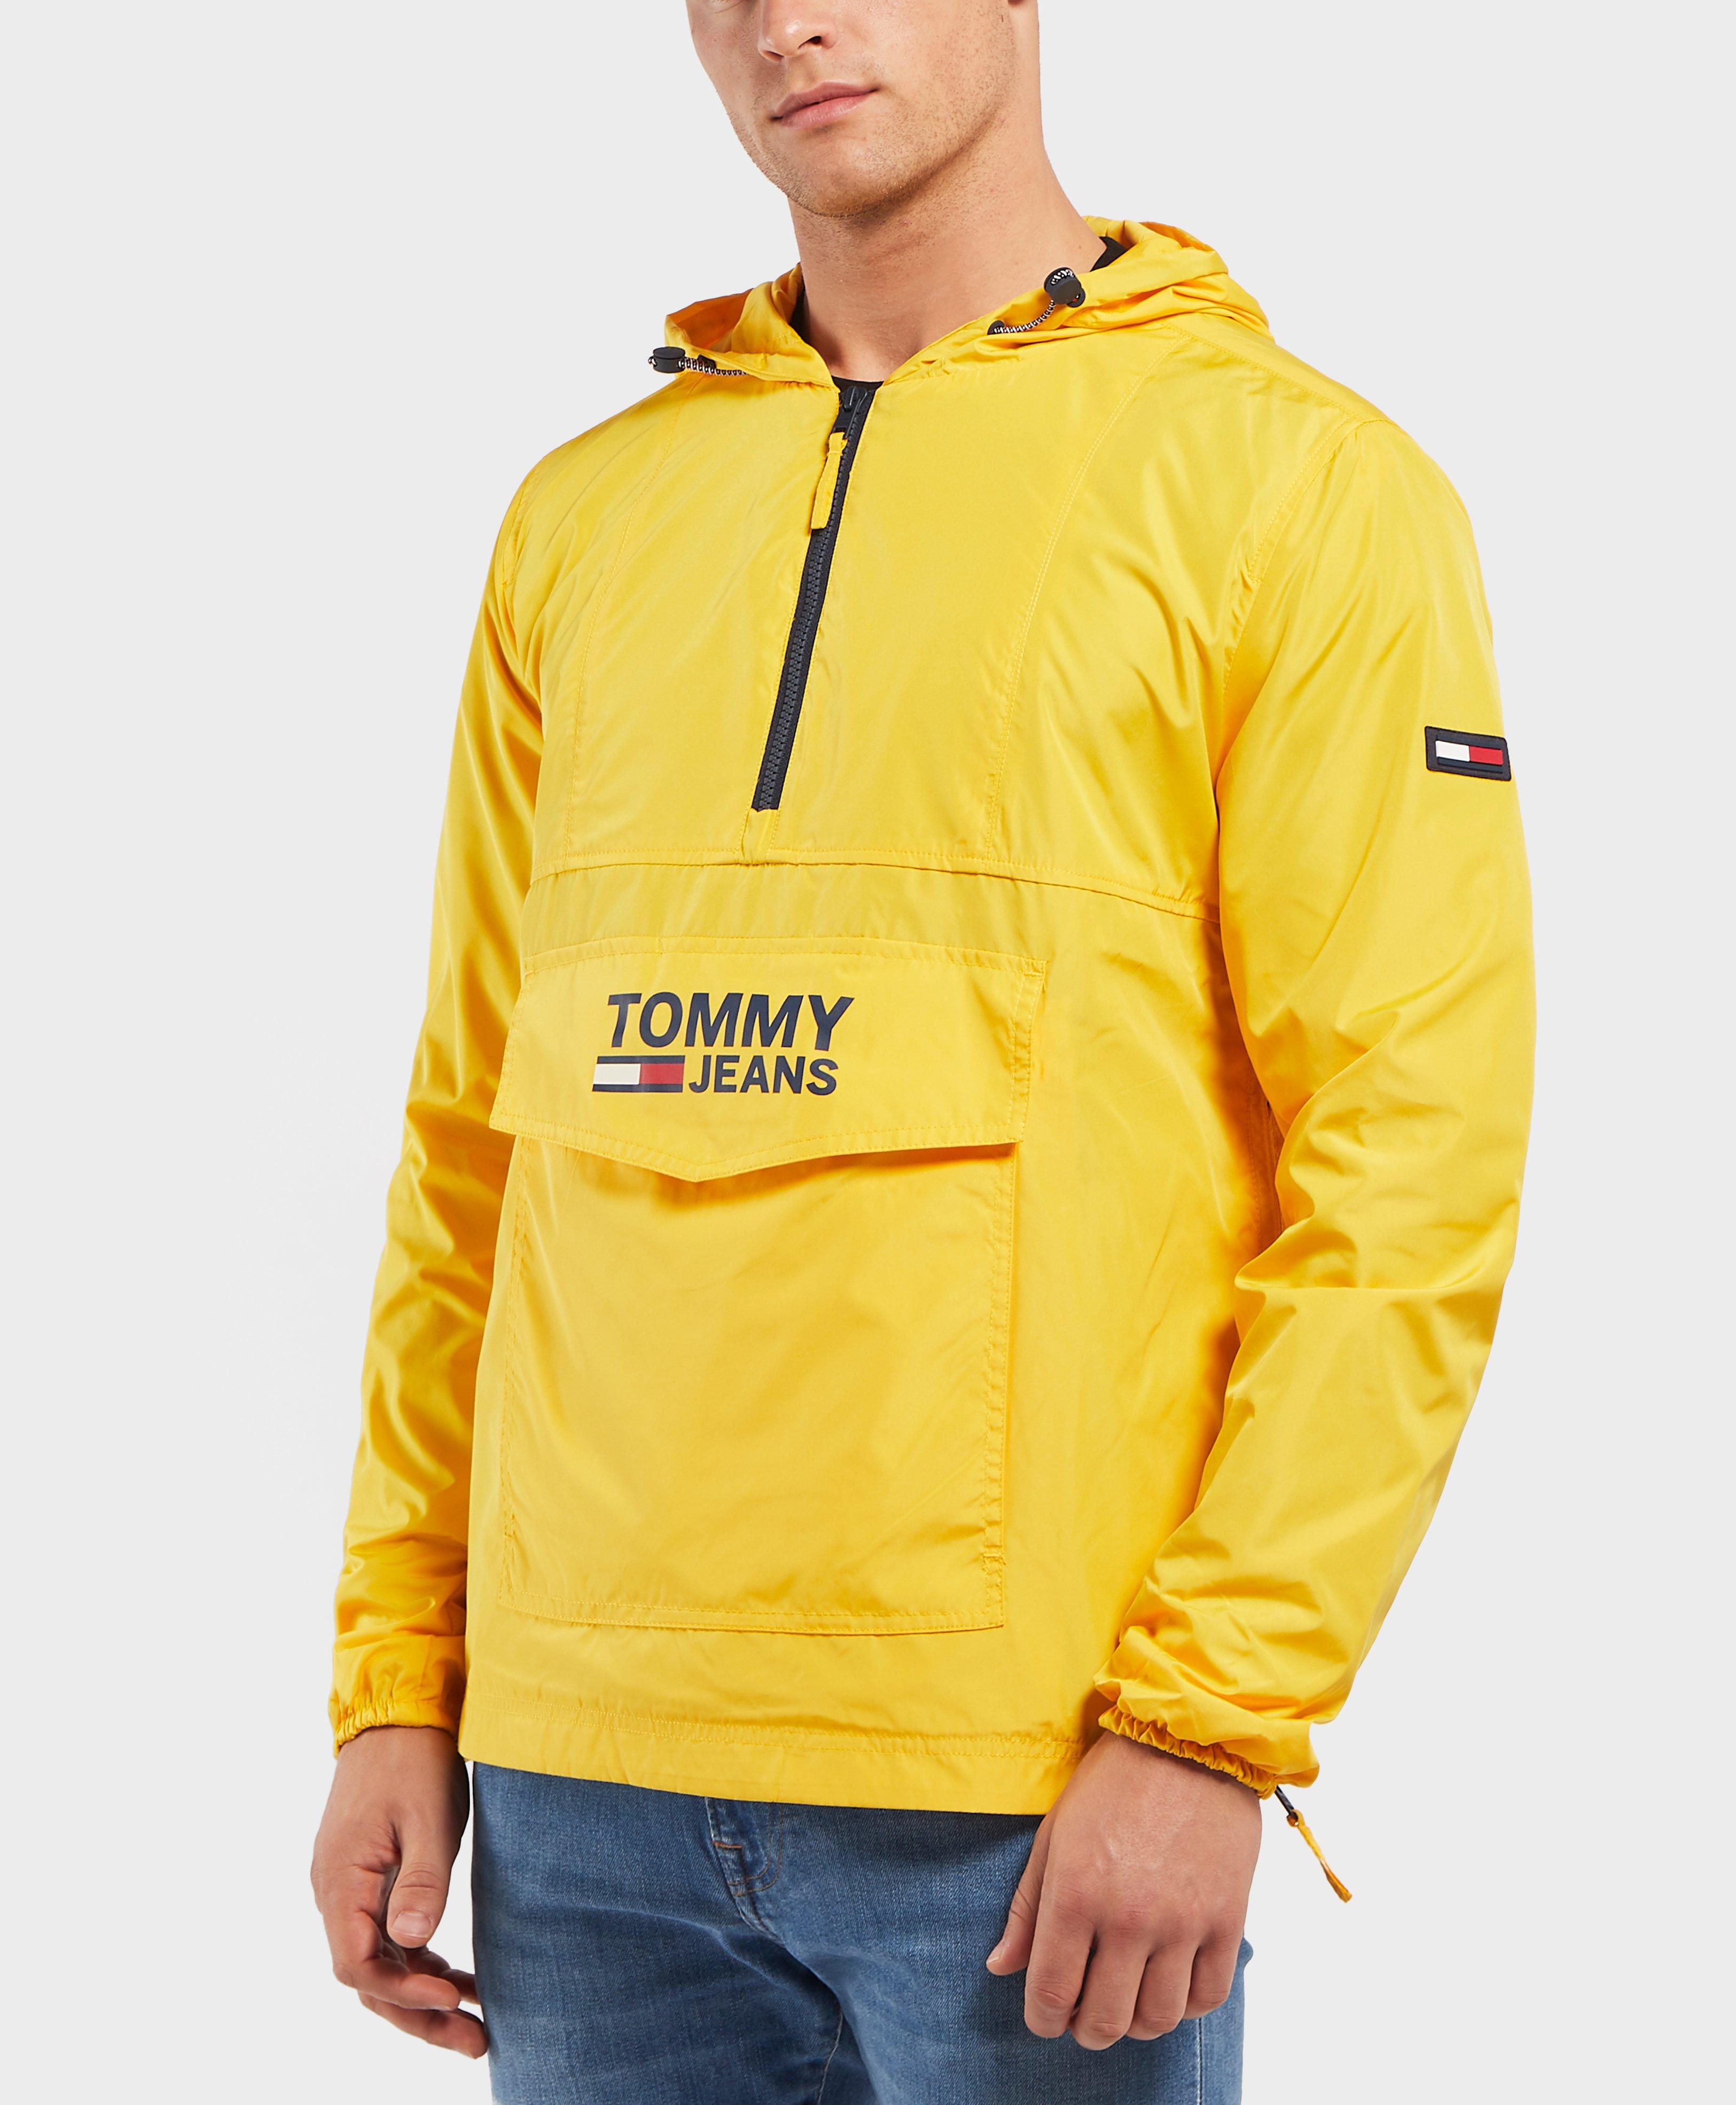 tommy hilfiger yellow anorak Cheaper Than Retail Price> Buy Clothing,  Accessories and lifestyle products for women & men -